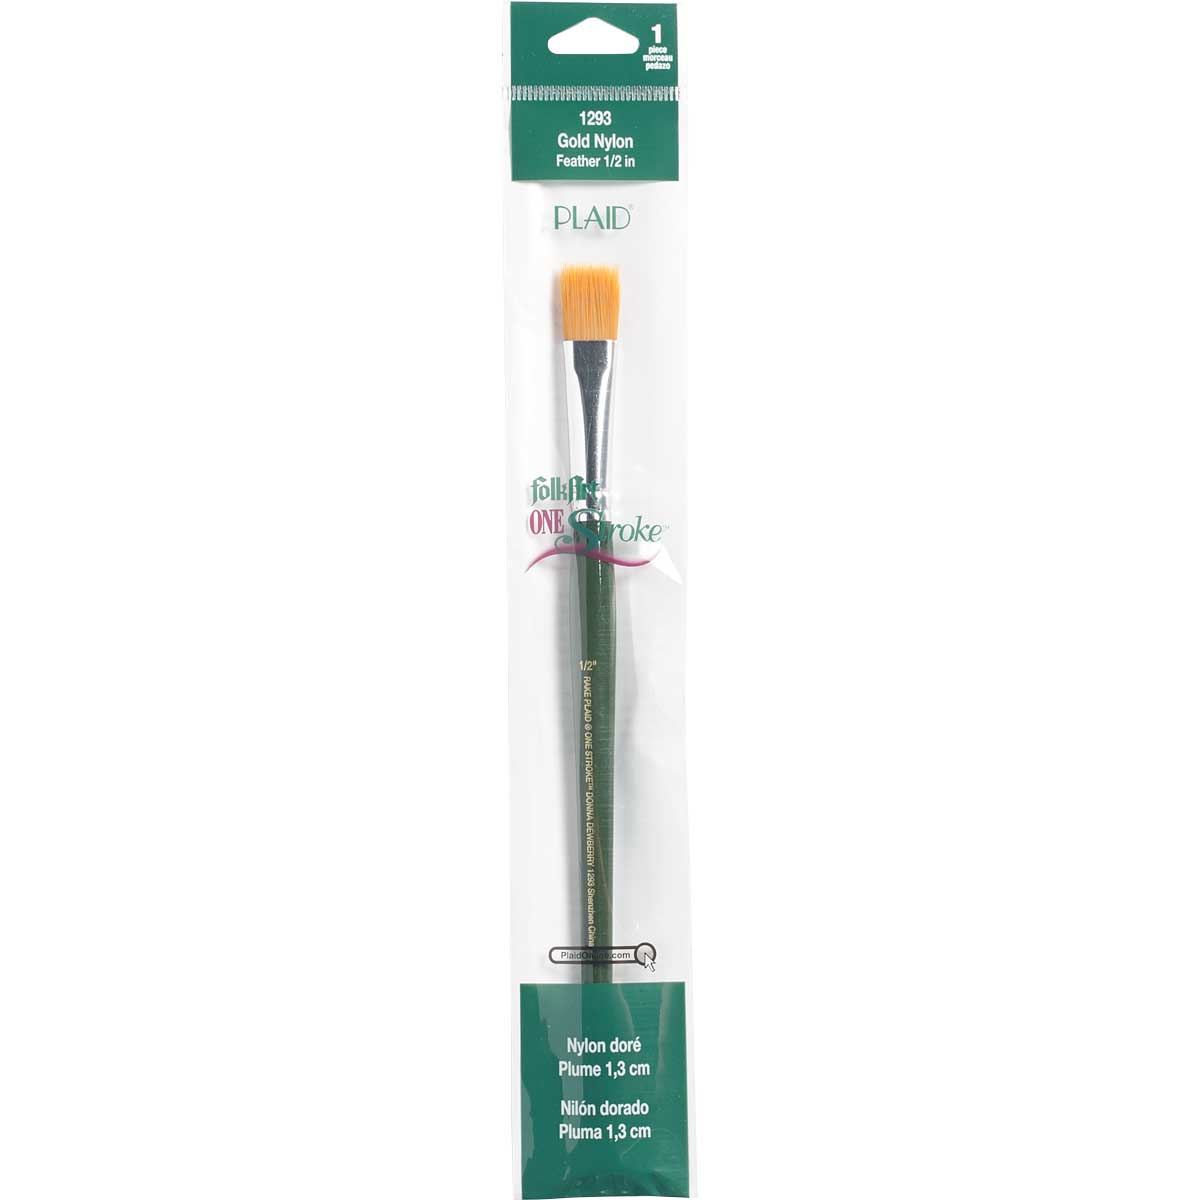 Donna Dewberry 20 One Stroke Brushes #1172 Tole Painting Retail $112 Scruffy Bru 